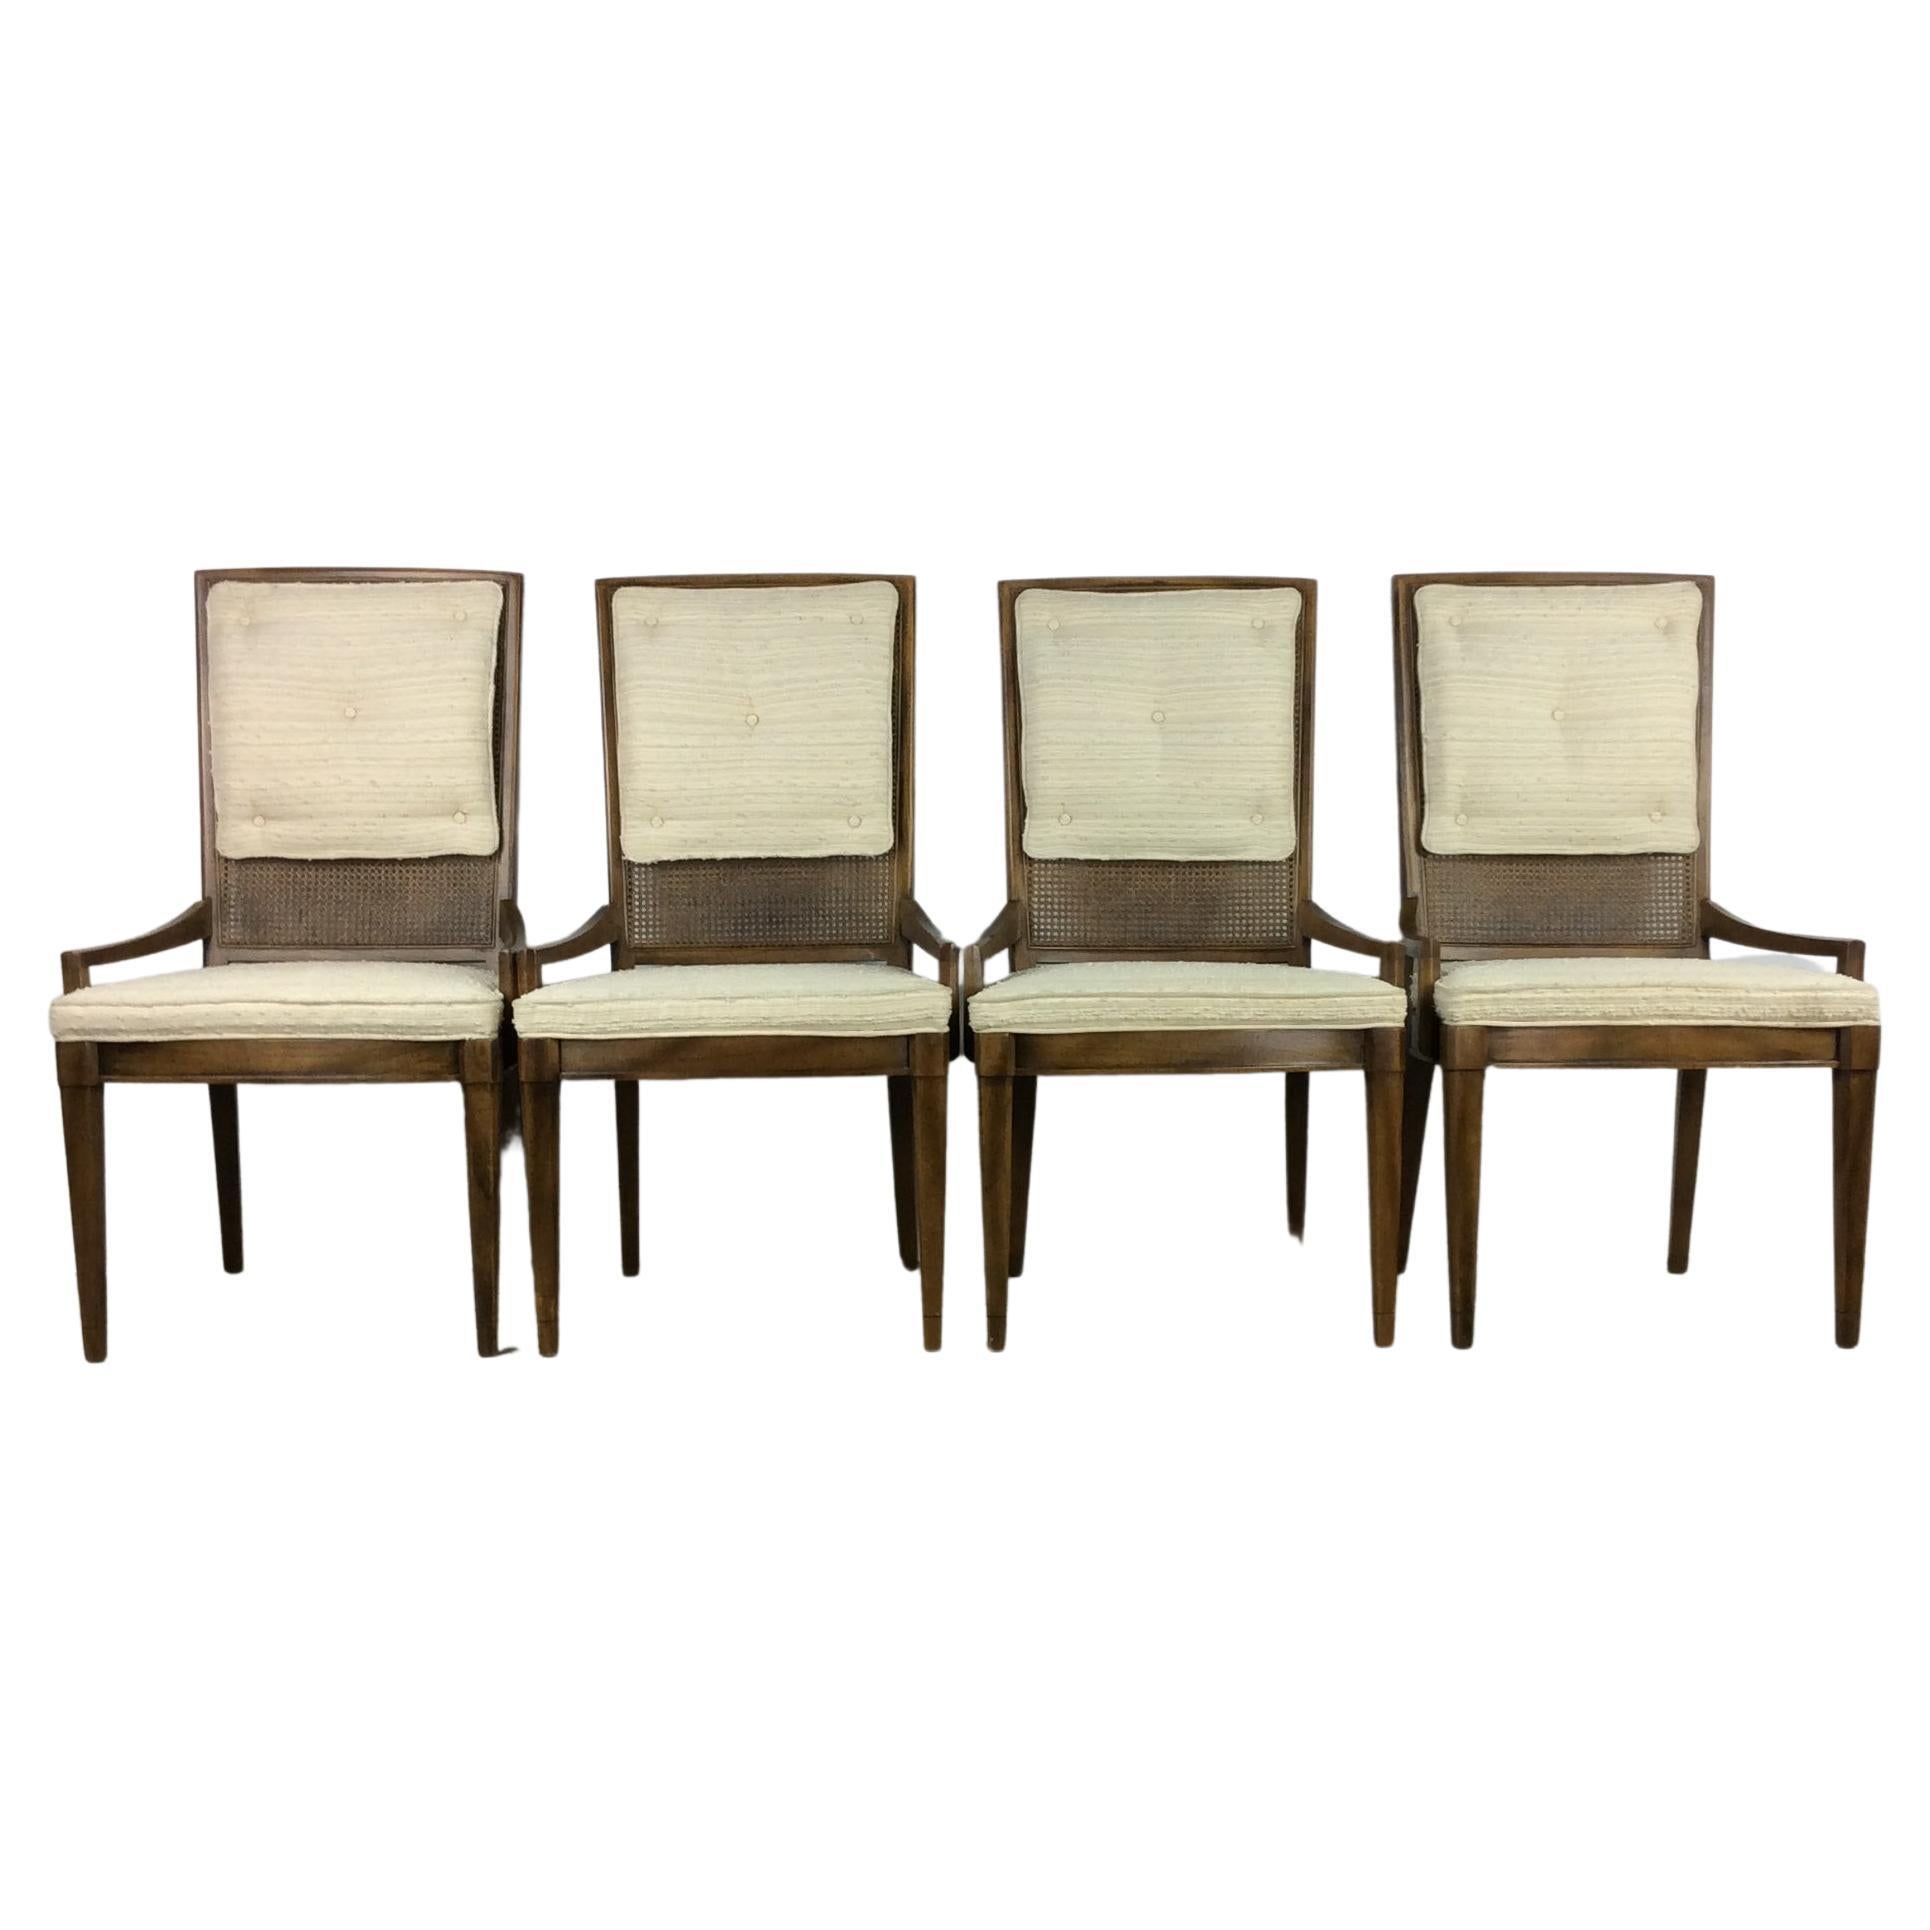 Set of 4 Mid-Century Modern Caned Back Dining Chairs with Tufted Cushions For Sale